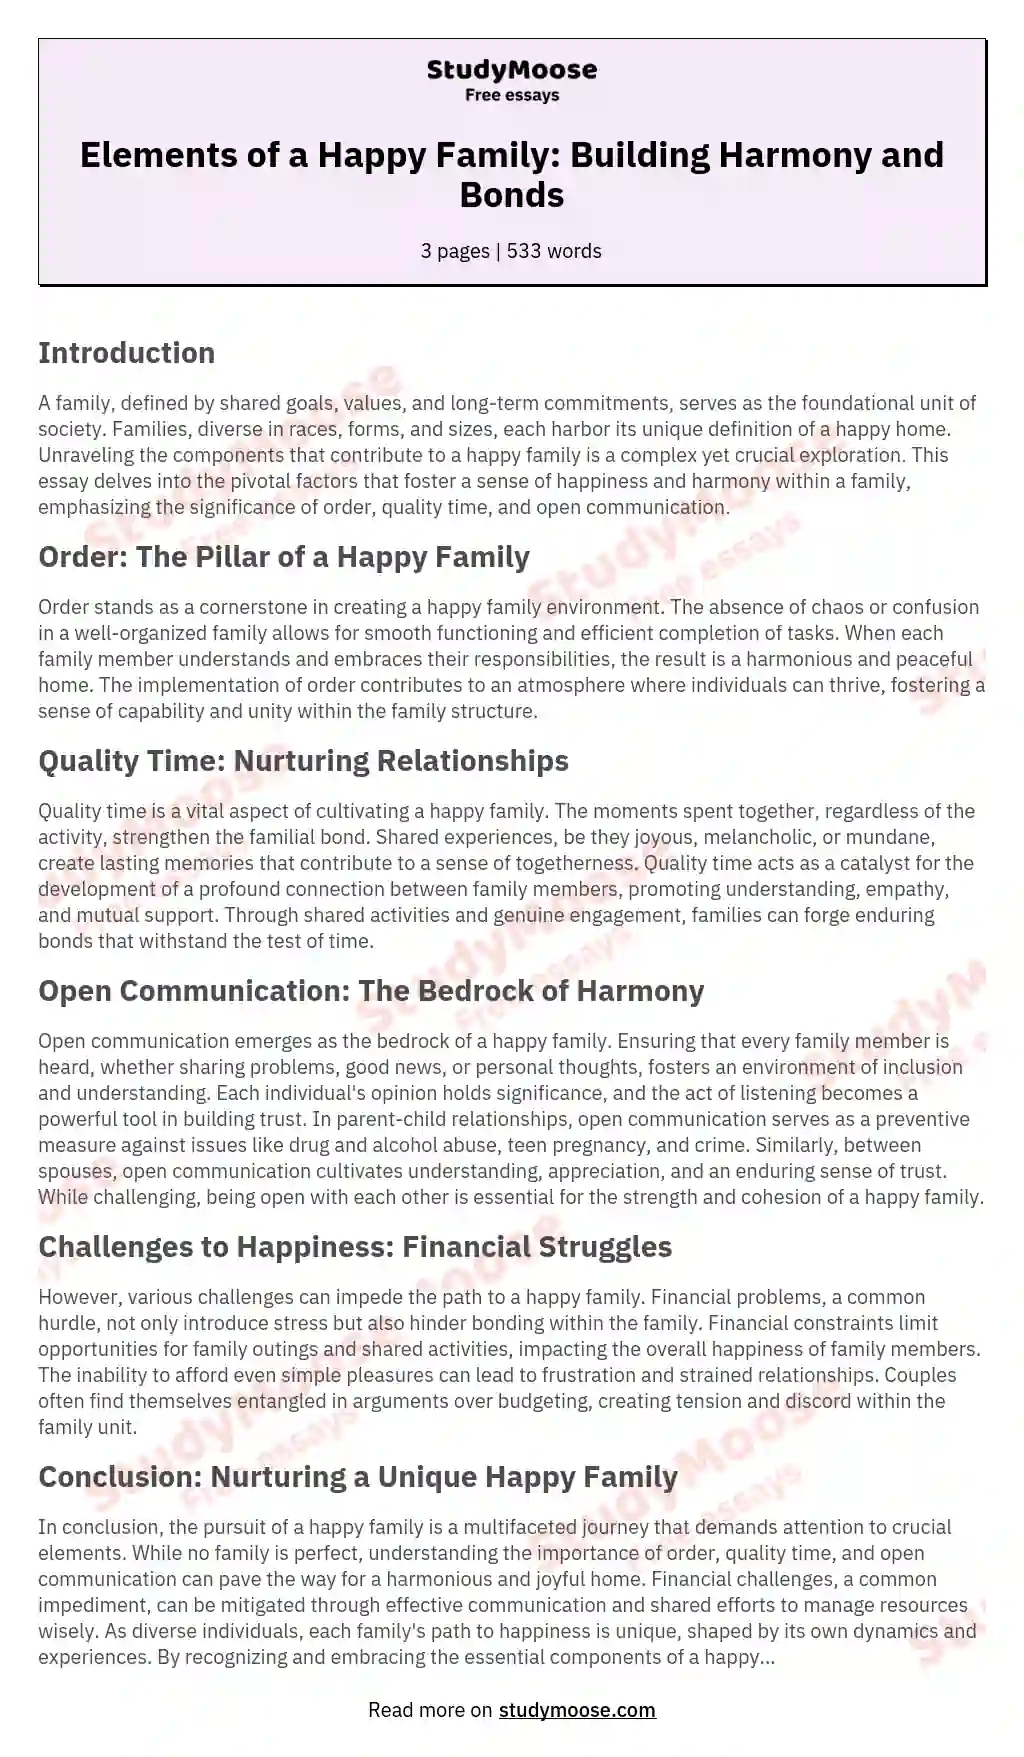 Elements of a Happy Family: Building Harmony and Bonds essay